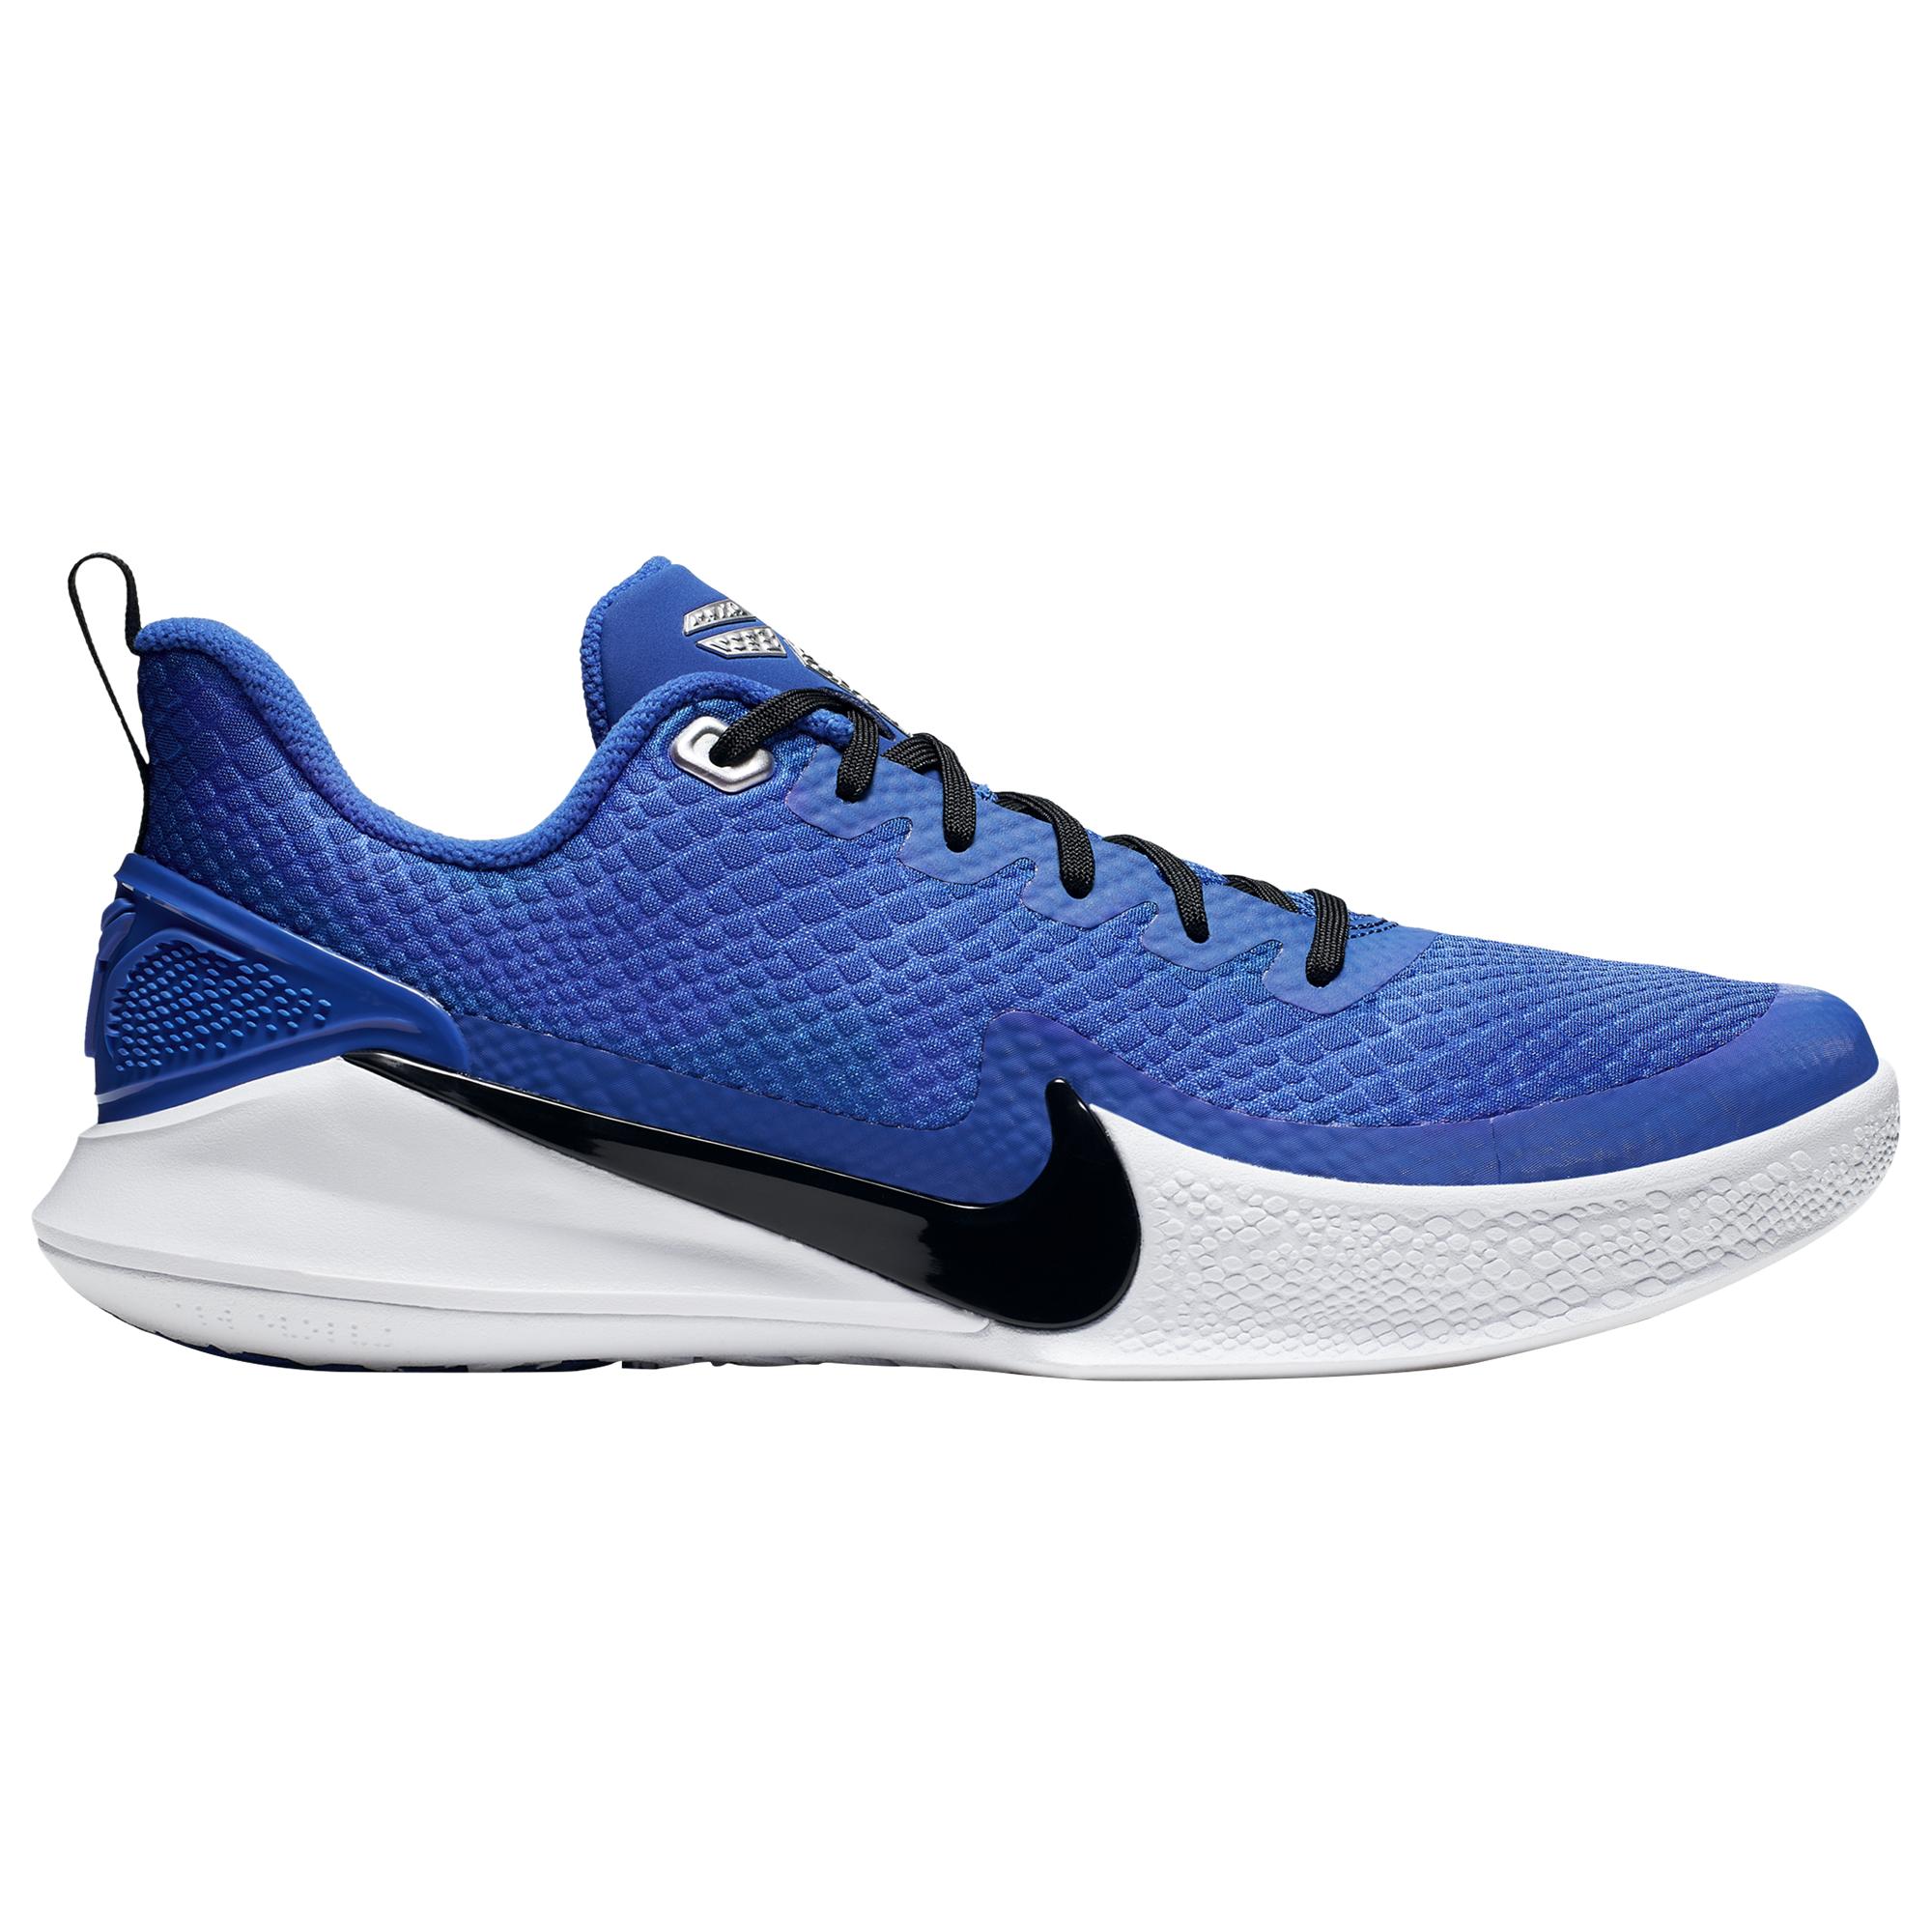 Nike Mamba Focus Basketball Shoes in Blue/Black (Blue) for Men - Save 1 ...